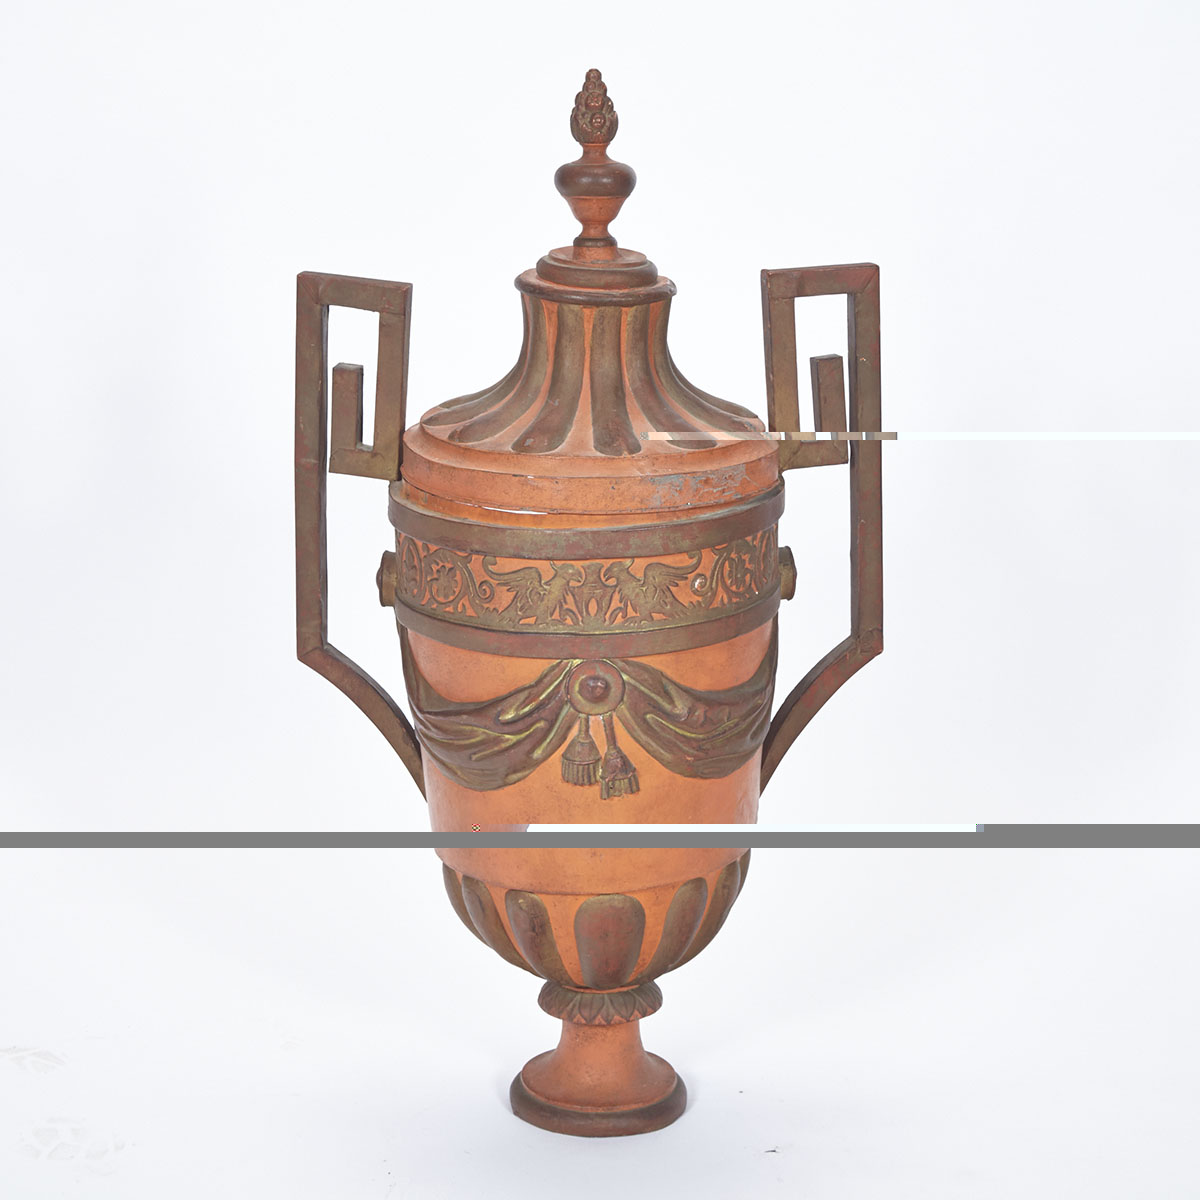 Large Neoclassical Painted Zinc Architectural Urn, late 19th century